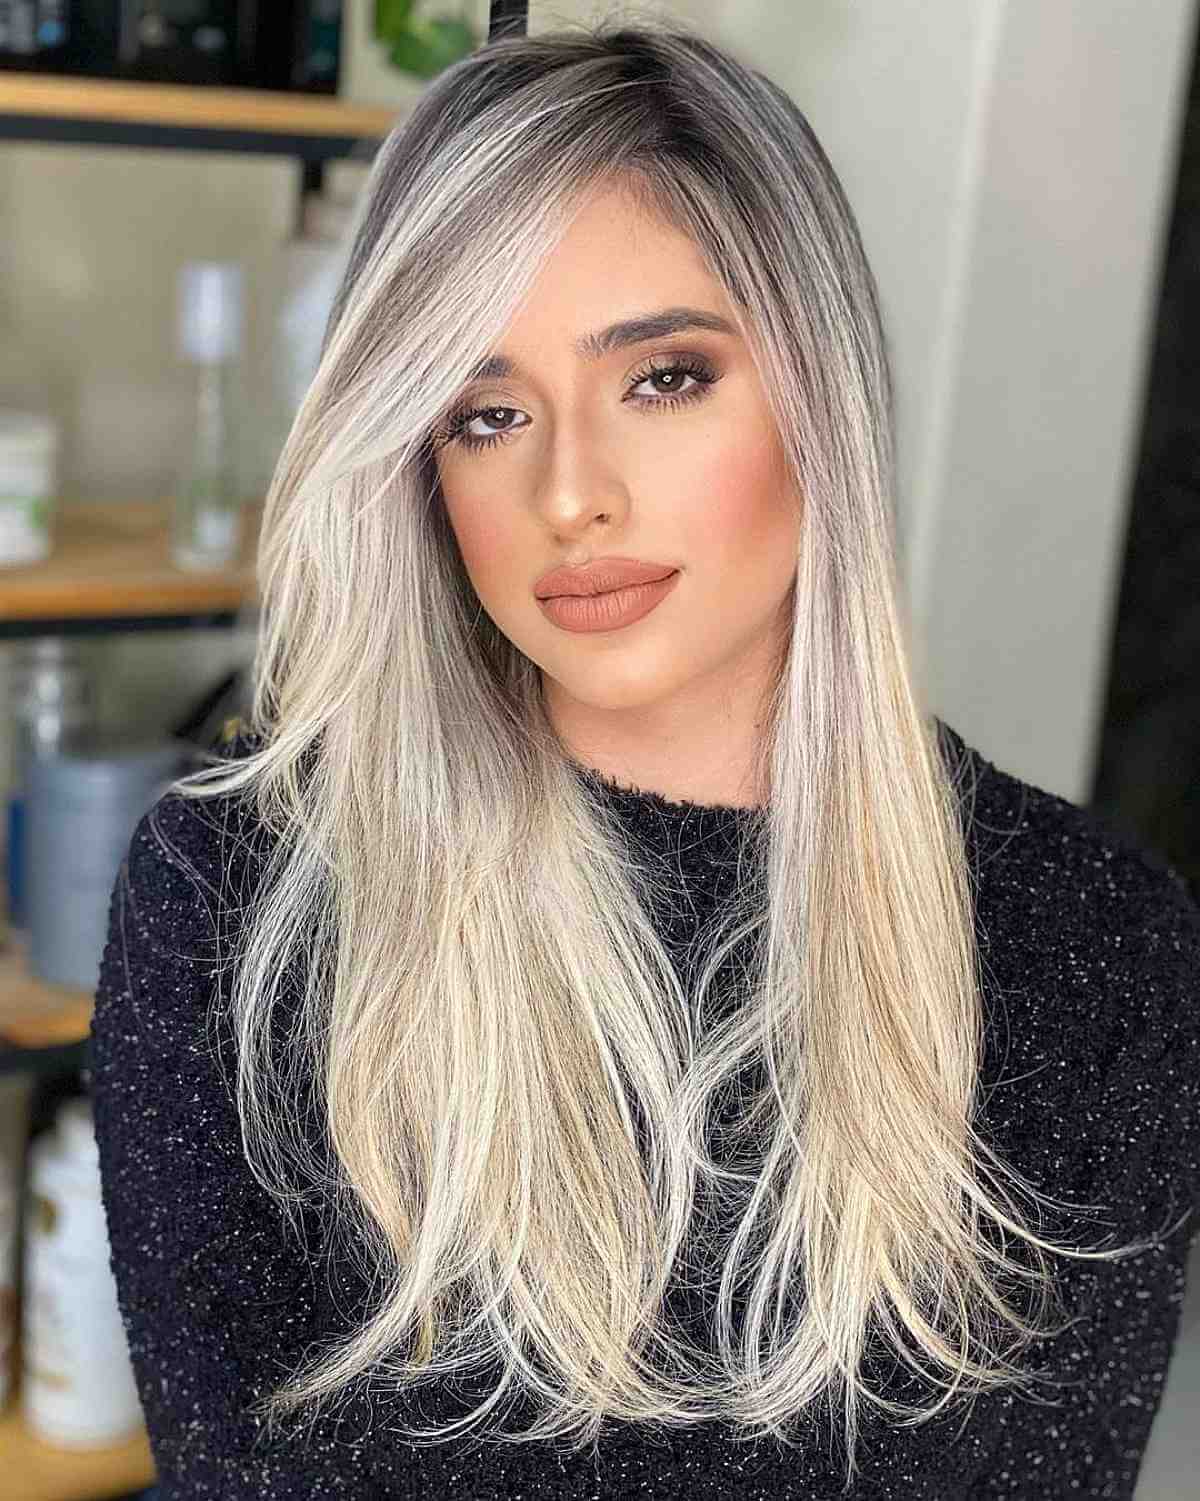 Pale Long Blonde Hair with Black Roots